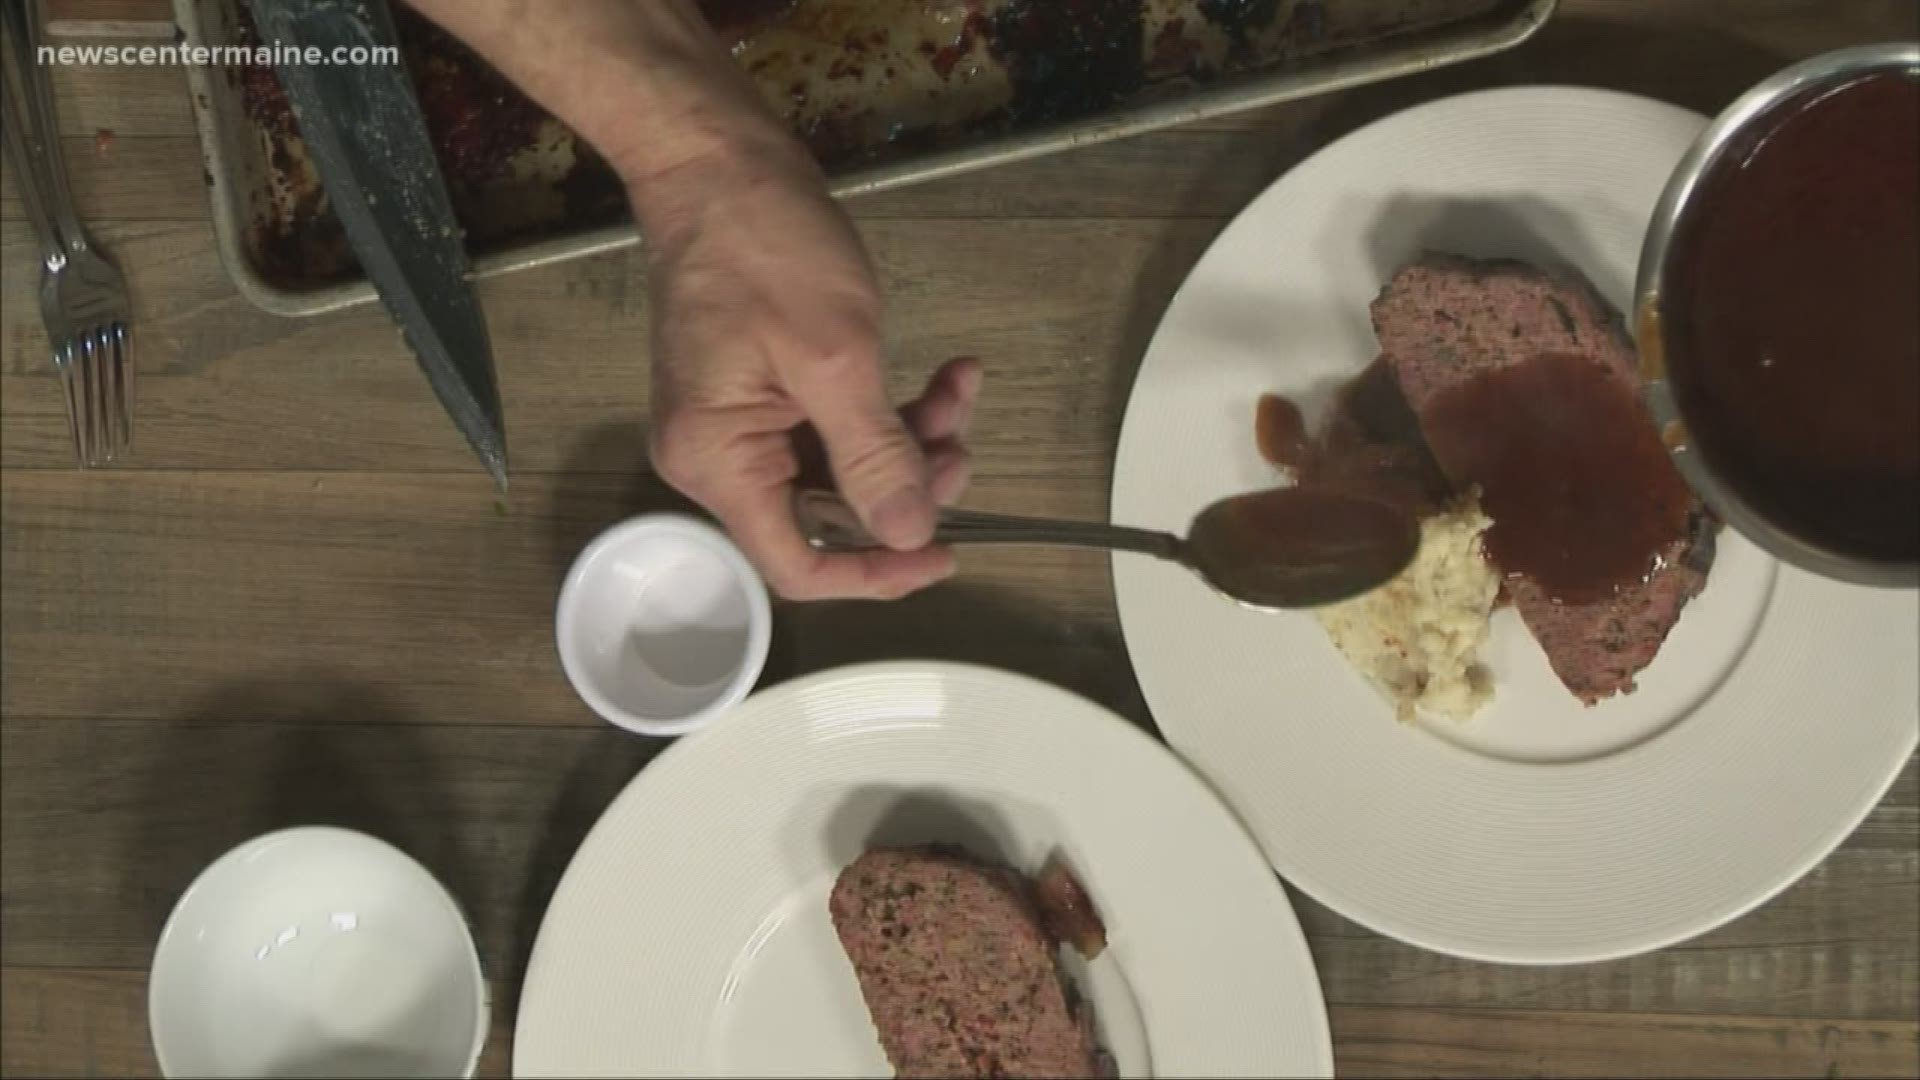 Chef David Turin shows us how to prepare a favorite from his restaurant's menu.